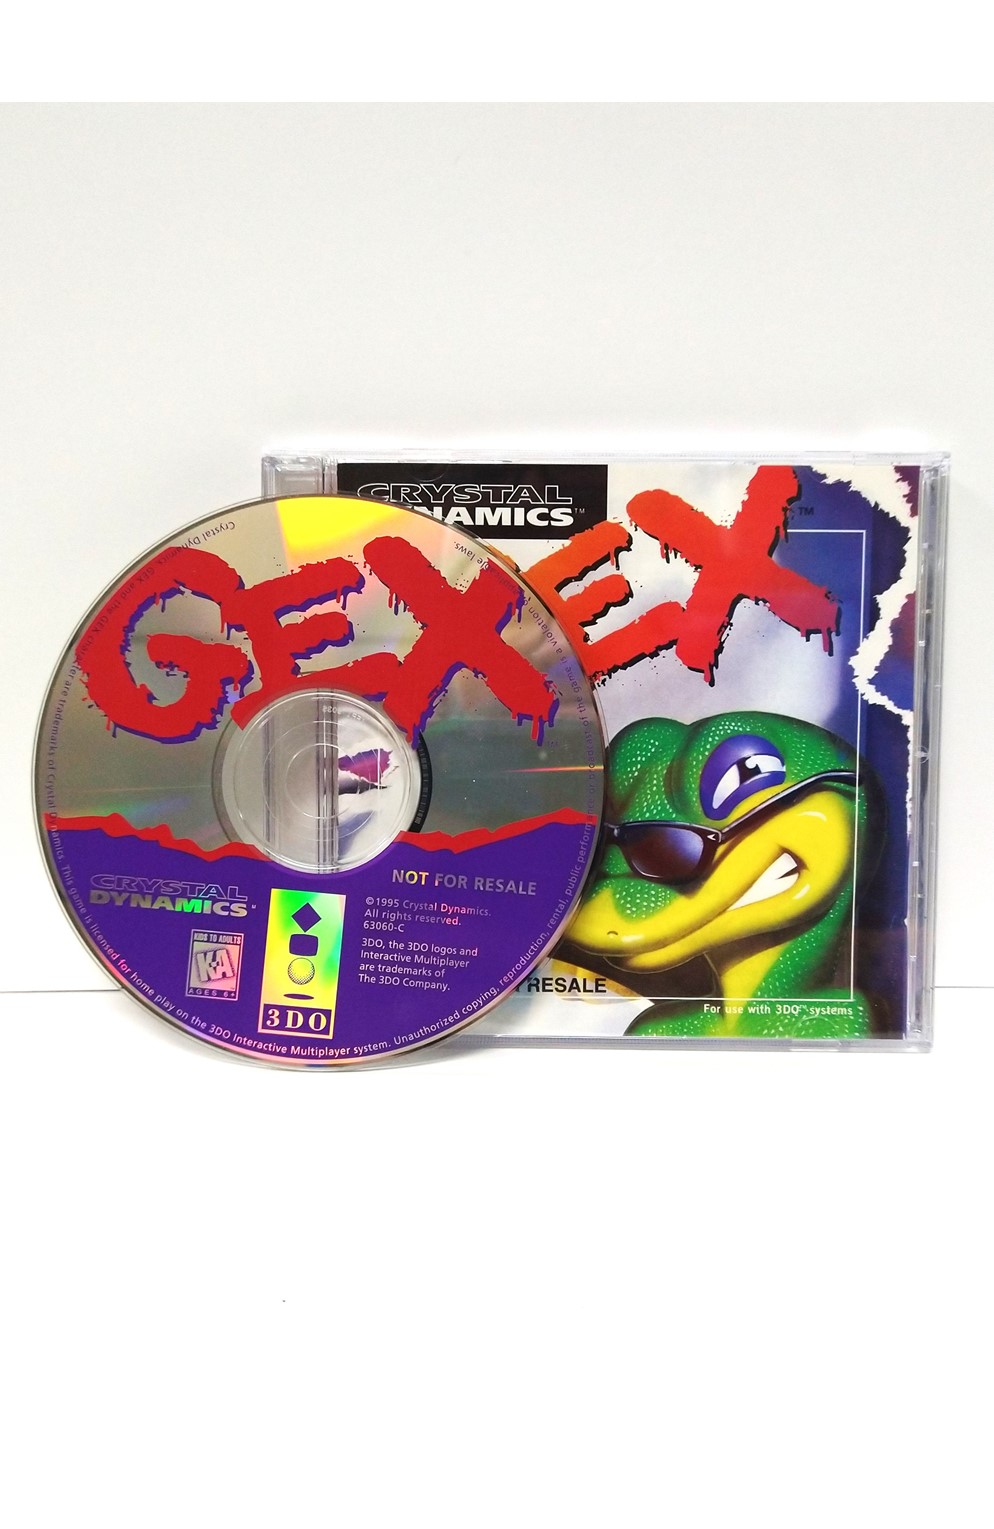 3Do Cystal Dynamics Gex (Not For Resale Version)